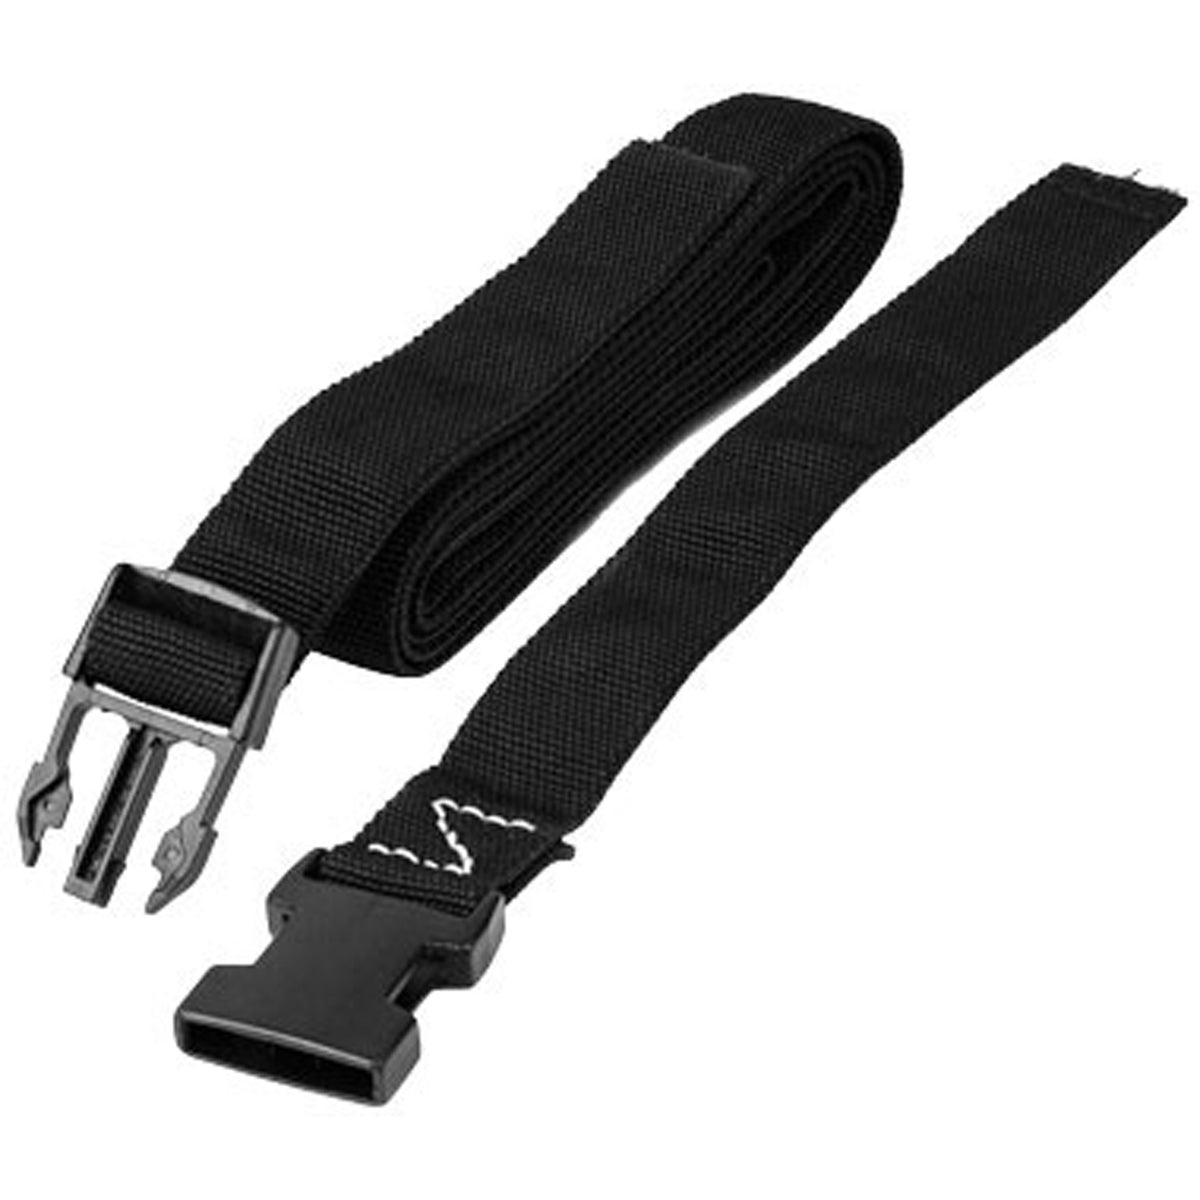 Sea-Dog 491115-1 Boat Hook Mooring Cover Support Crown Webbing Straps